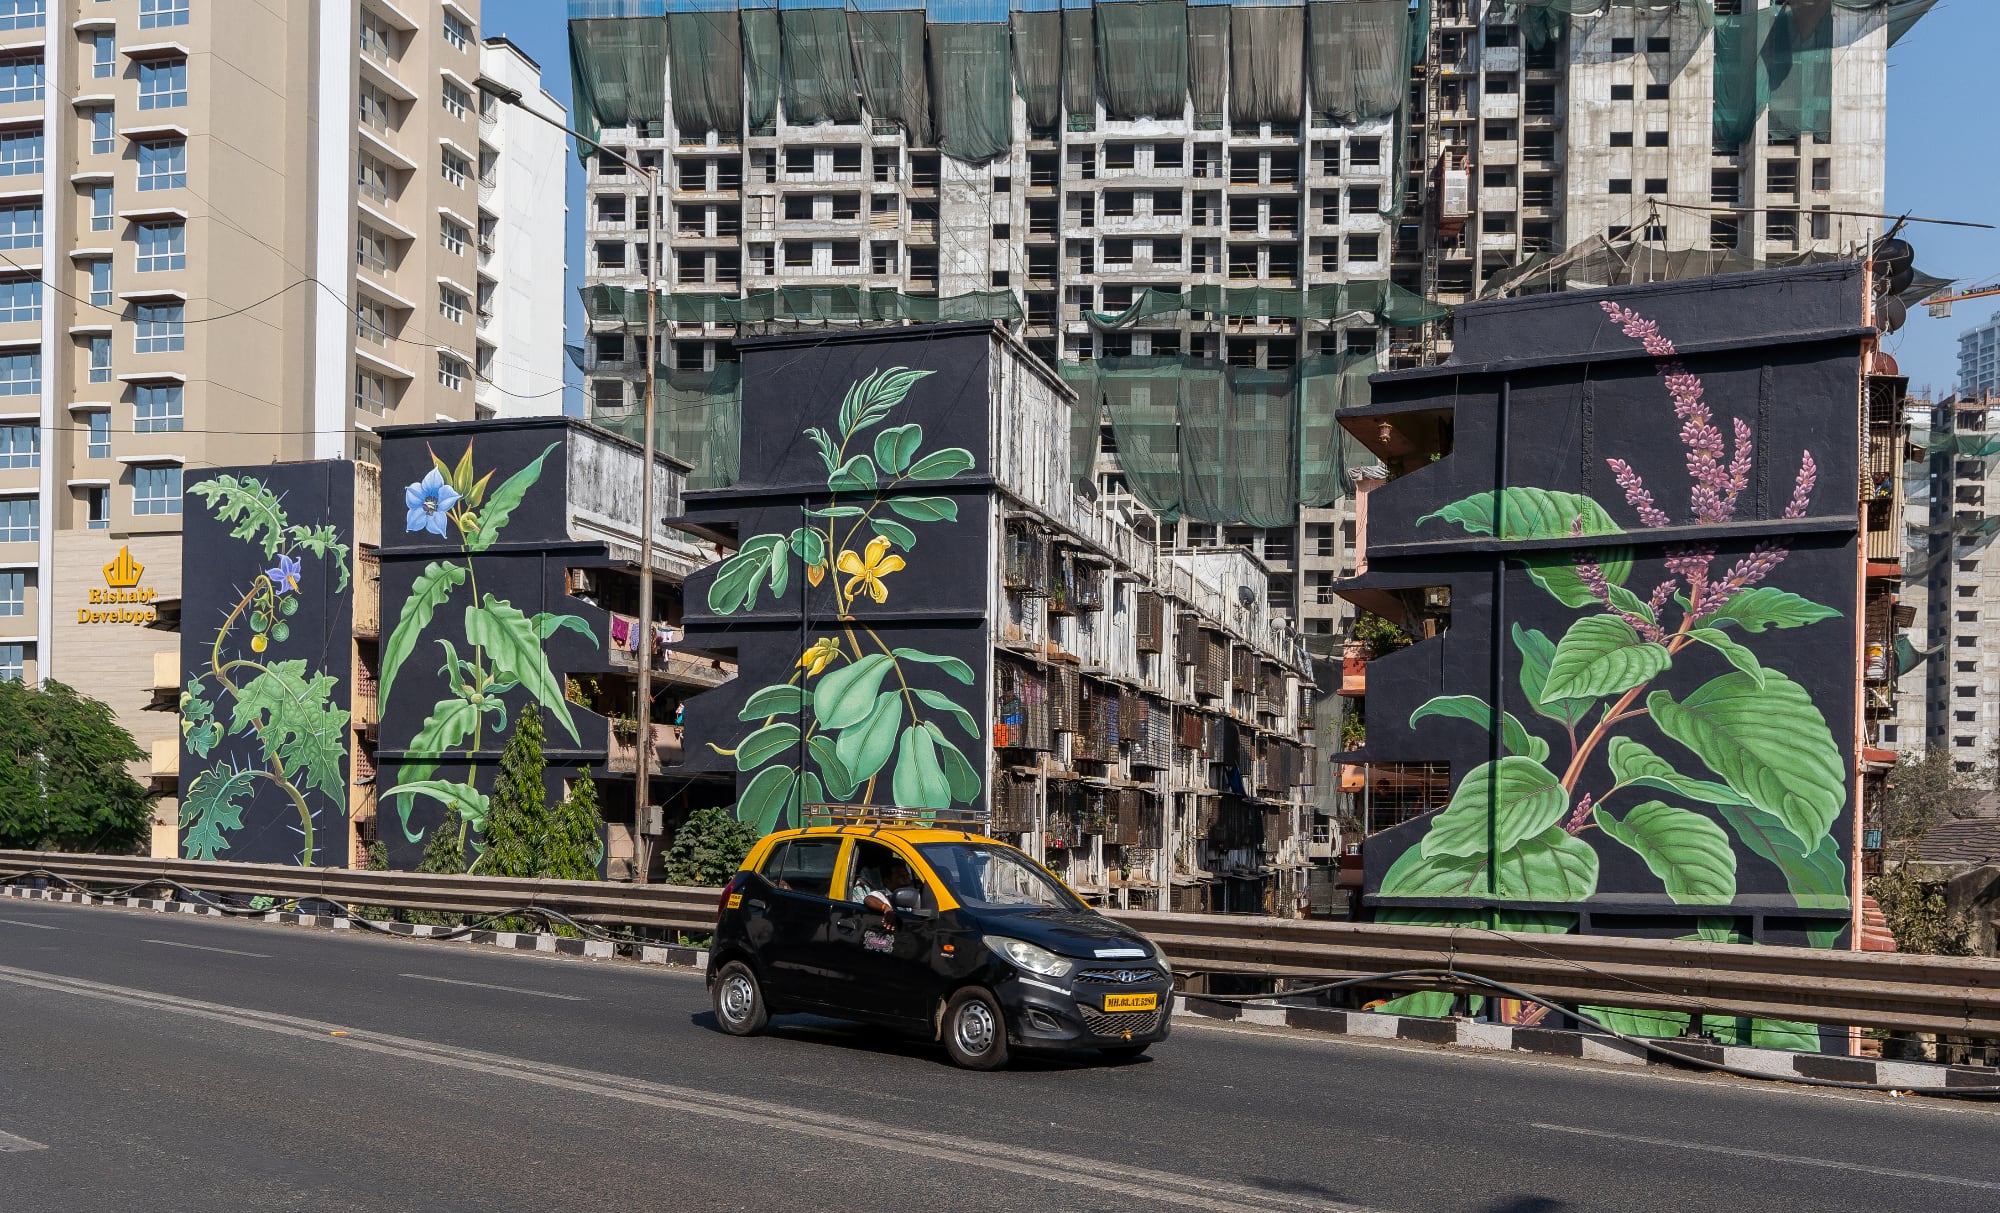 Four green plants with blue, yellow and pink flowers tower over Mumbai with a road in the foreground